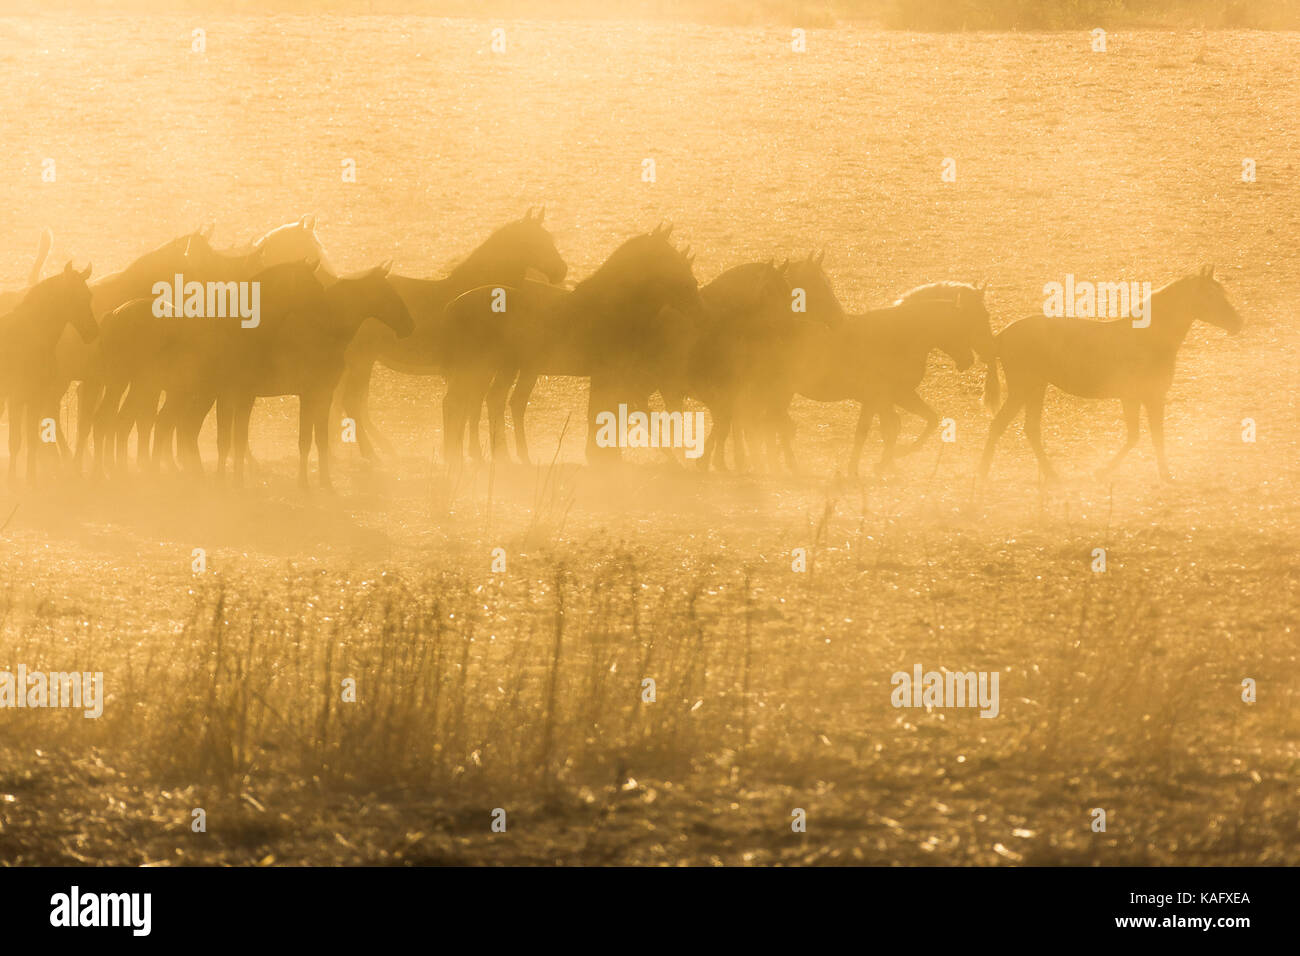 Pure Spanish Horse, Andalusian. Herd of juvenile mares walking on dusty ground, silhouetted against the evening sky. Spain Stock Photo